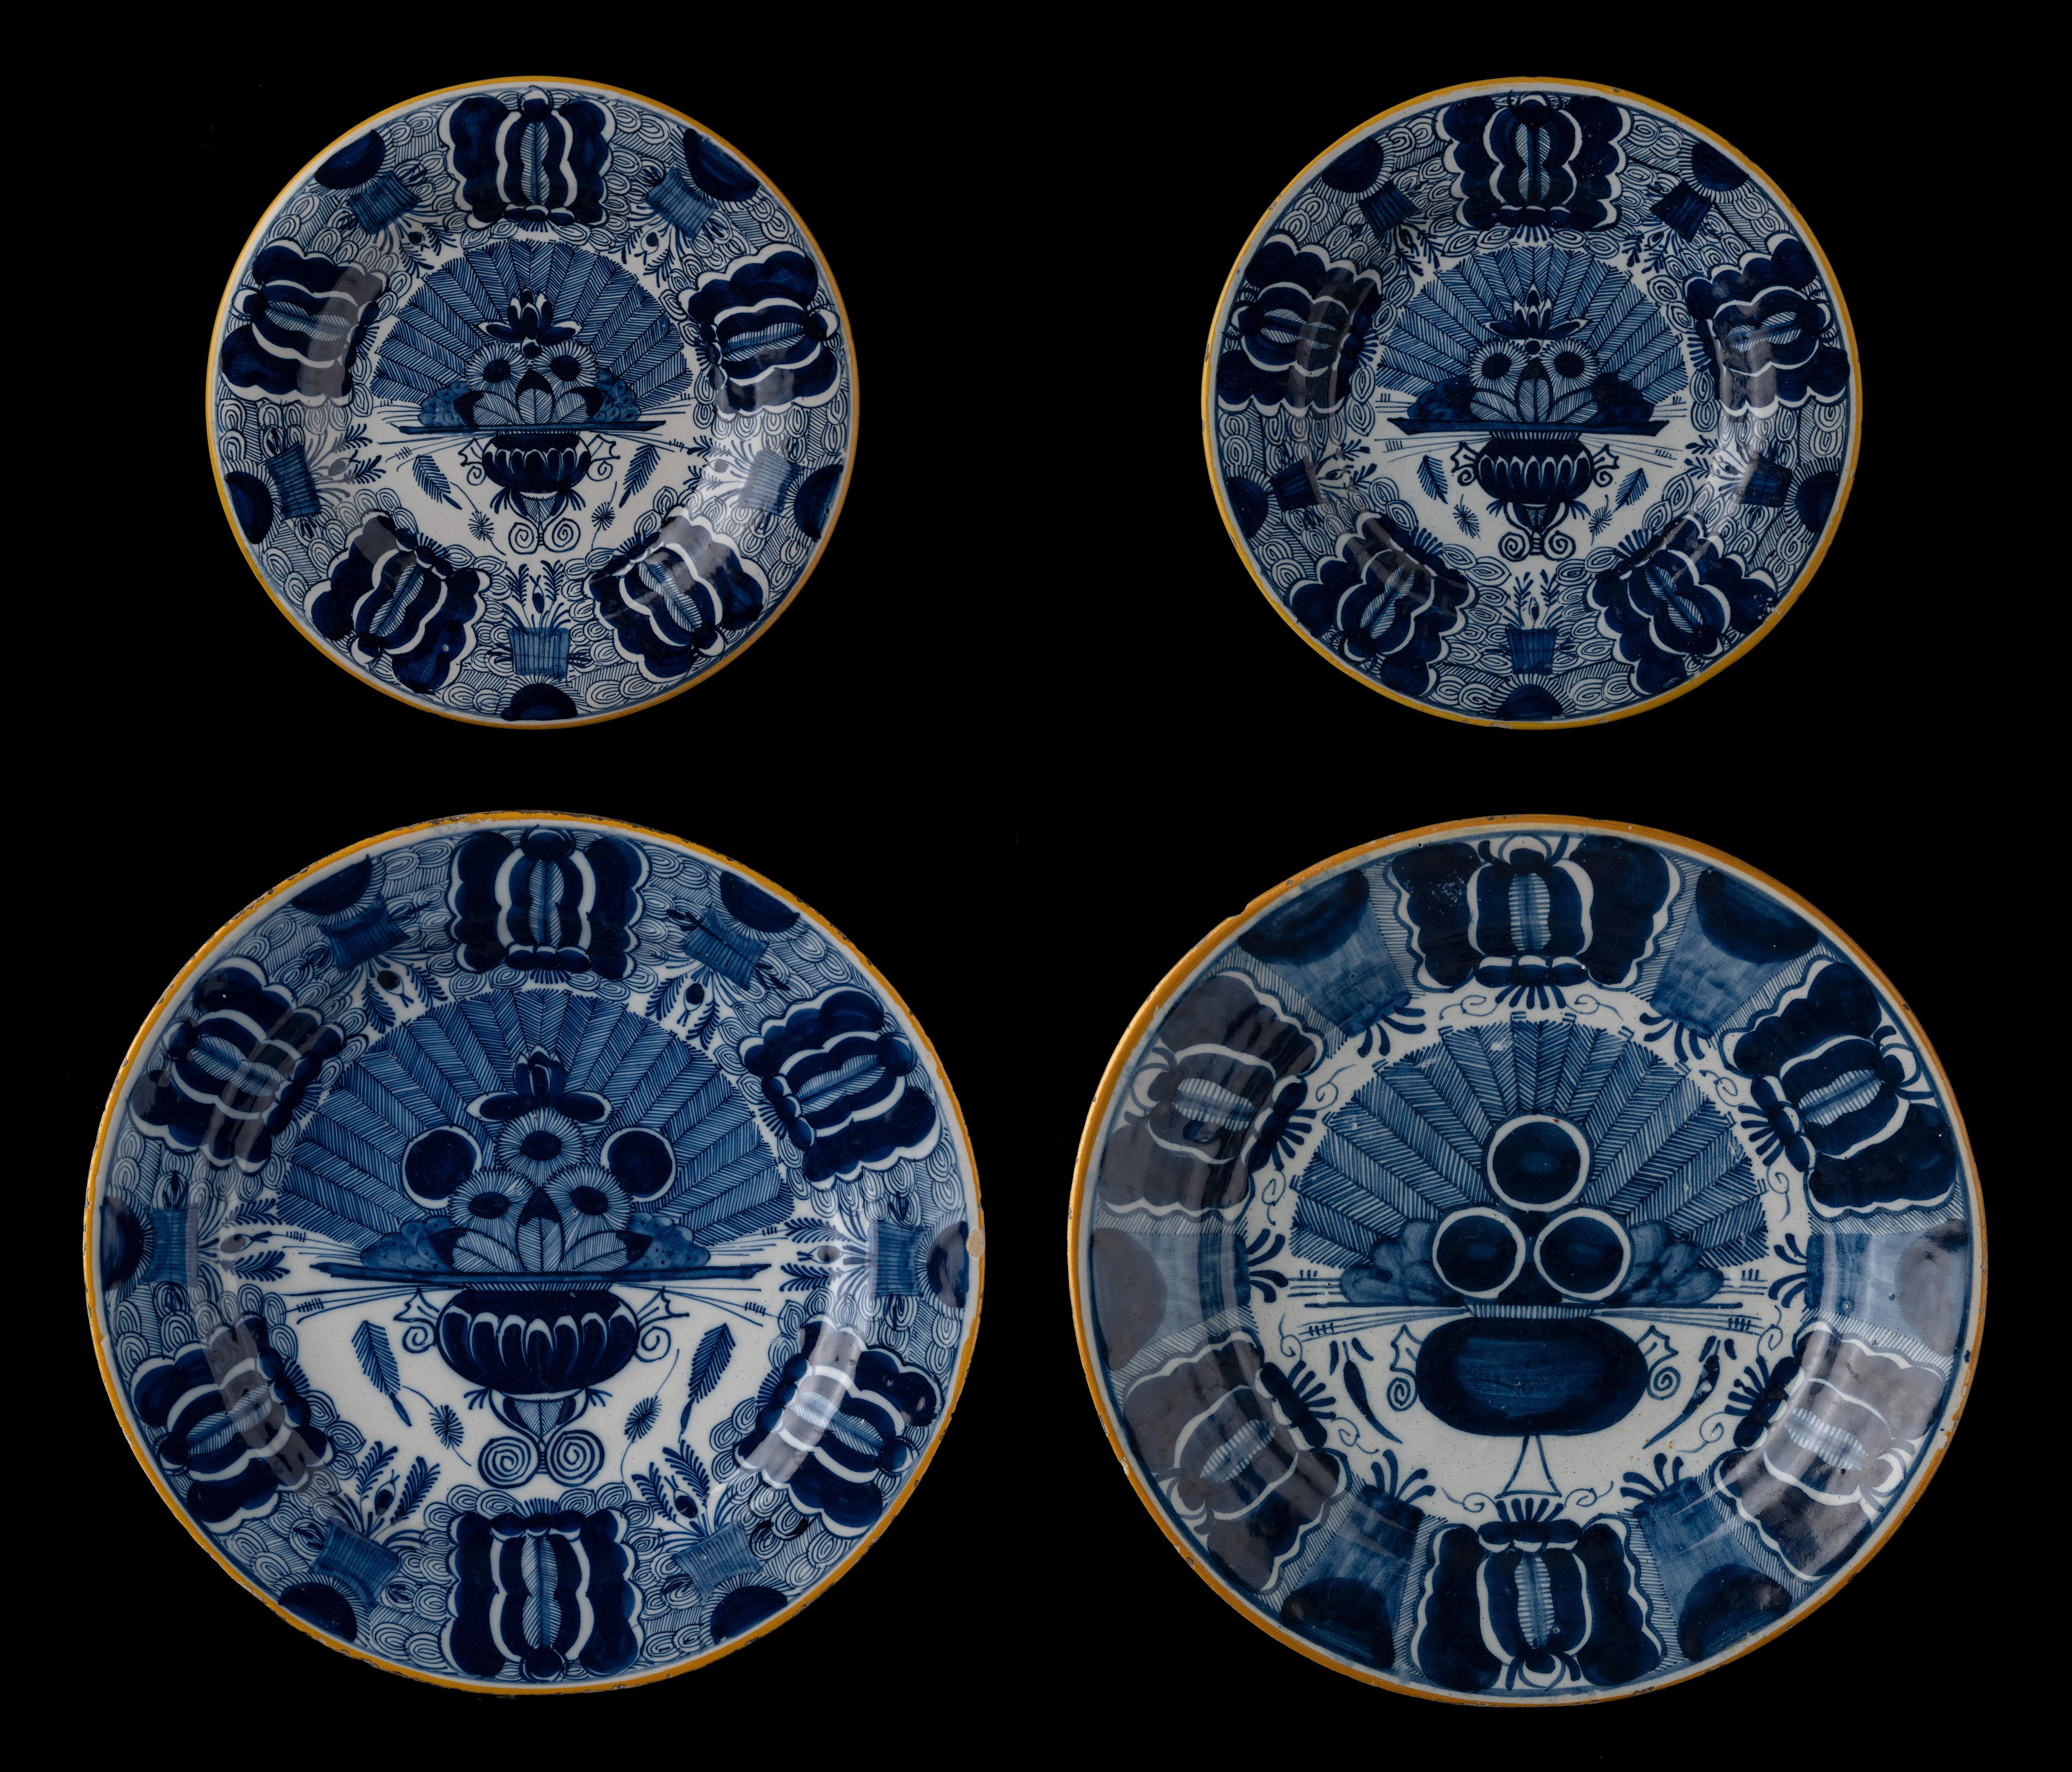 A set of two peacock design Delft plates, and two larger Delft dishes. All hand-painted with 